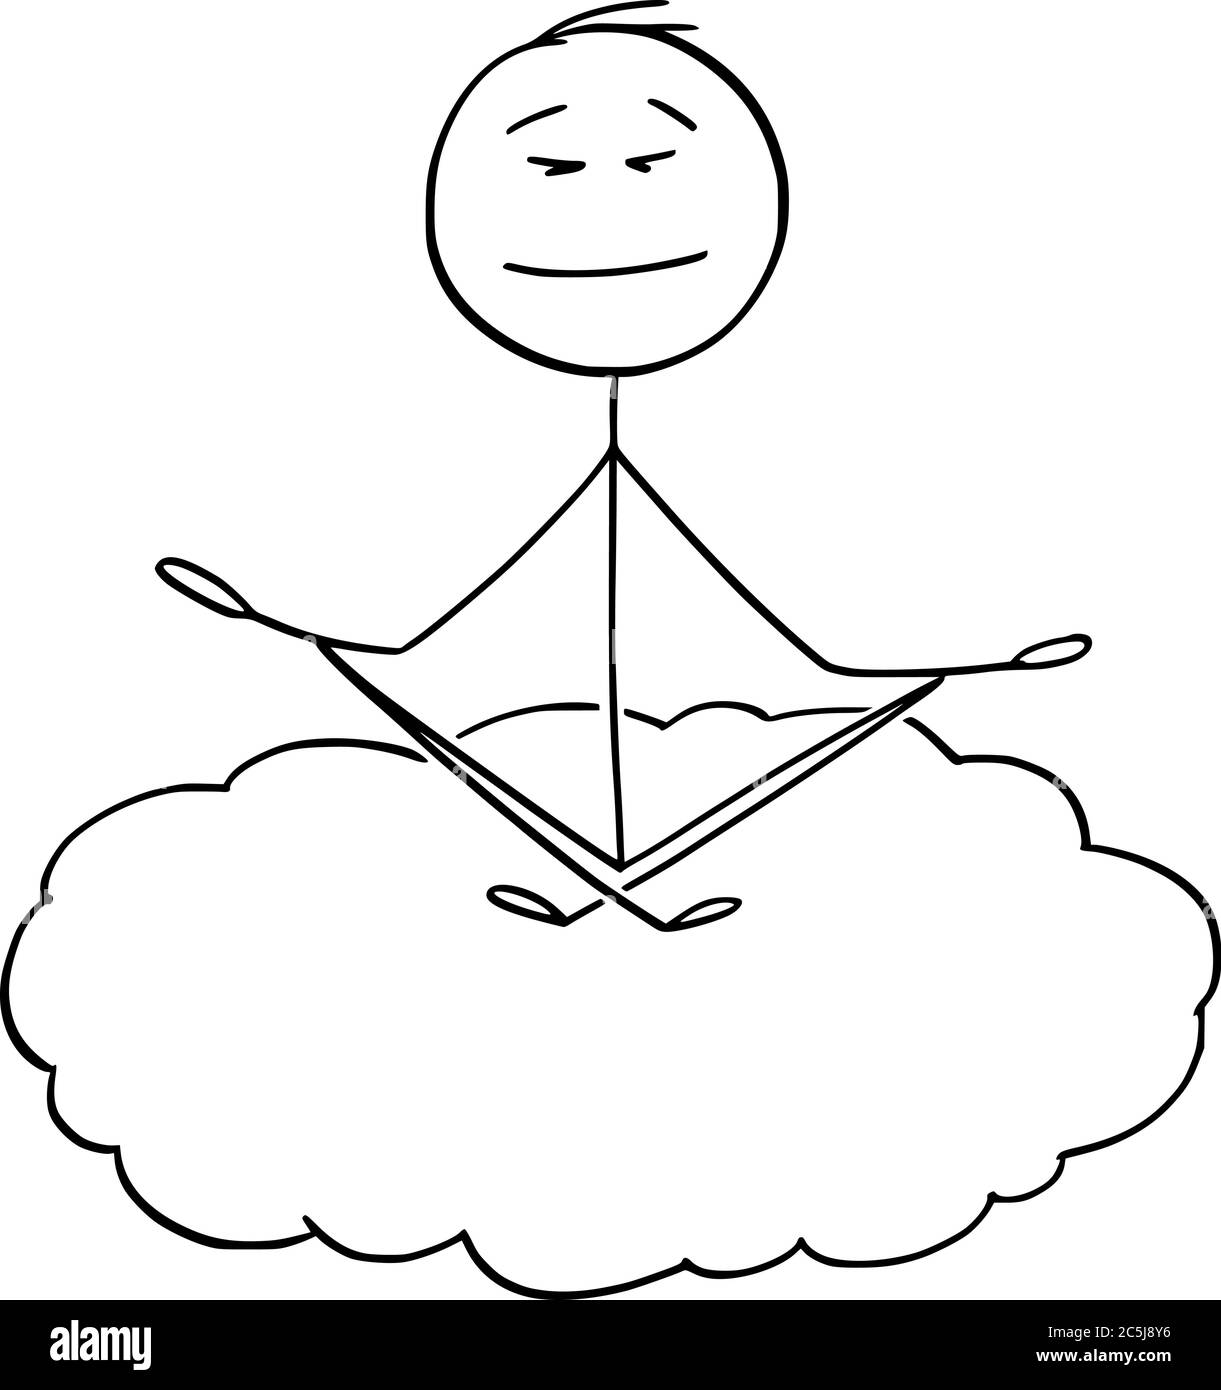 Vector cartoon stick figure drawing conceptual illustration of peaceful man meditating on cloud in heaven. Relaxation and lifestyle concept. Stock Vector